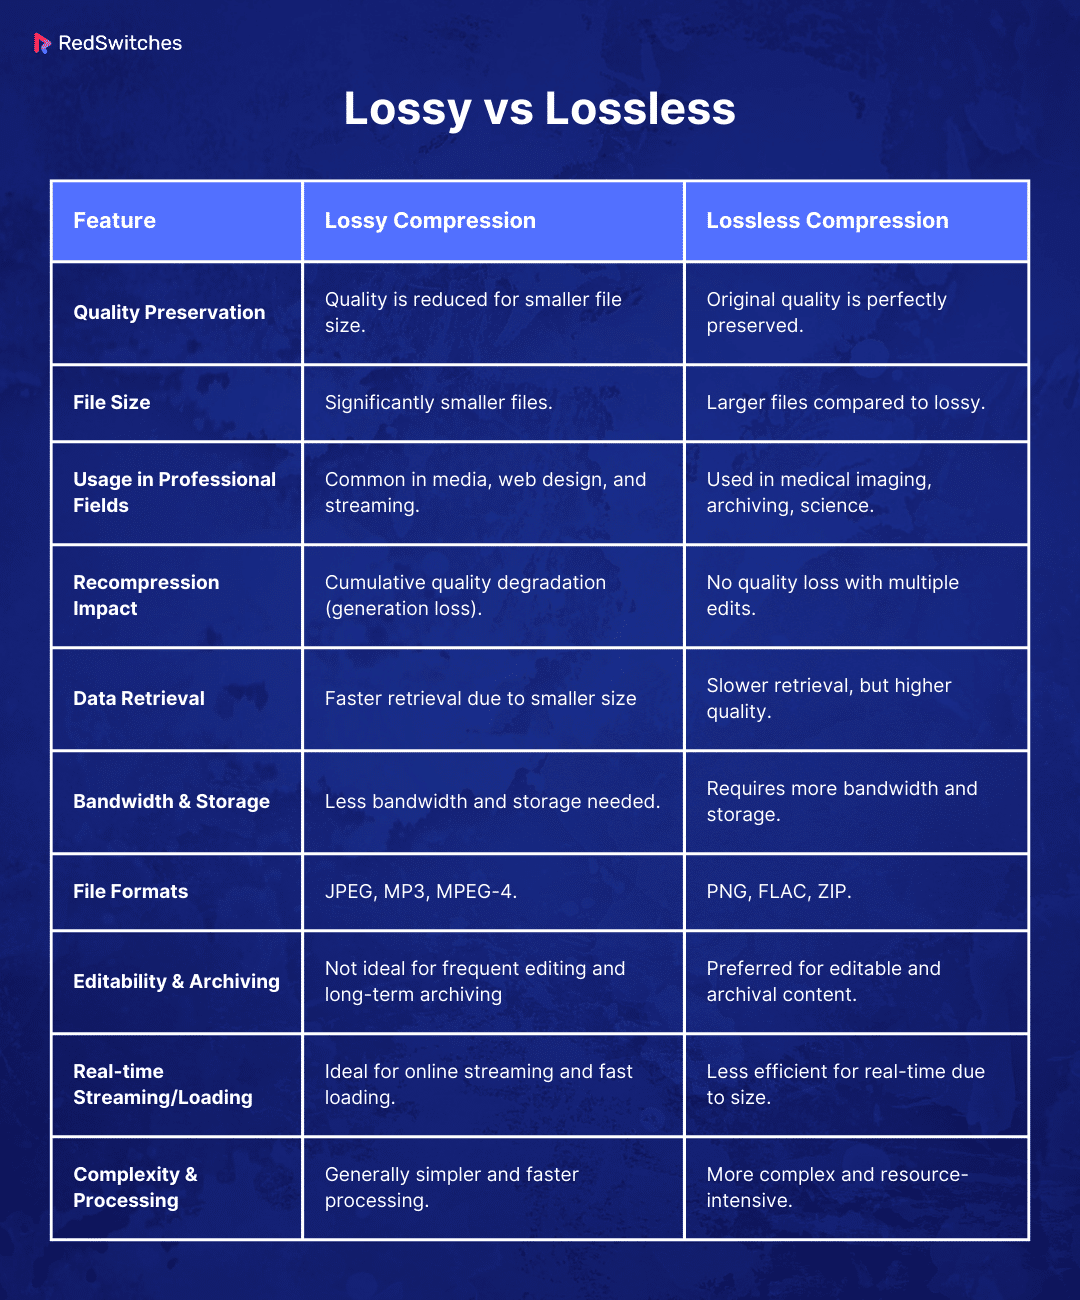 Lossy vs Lossless Differences